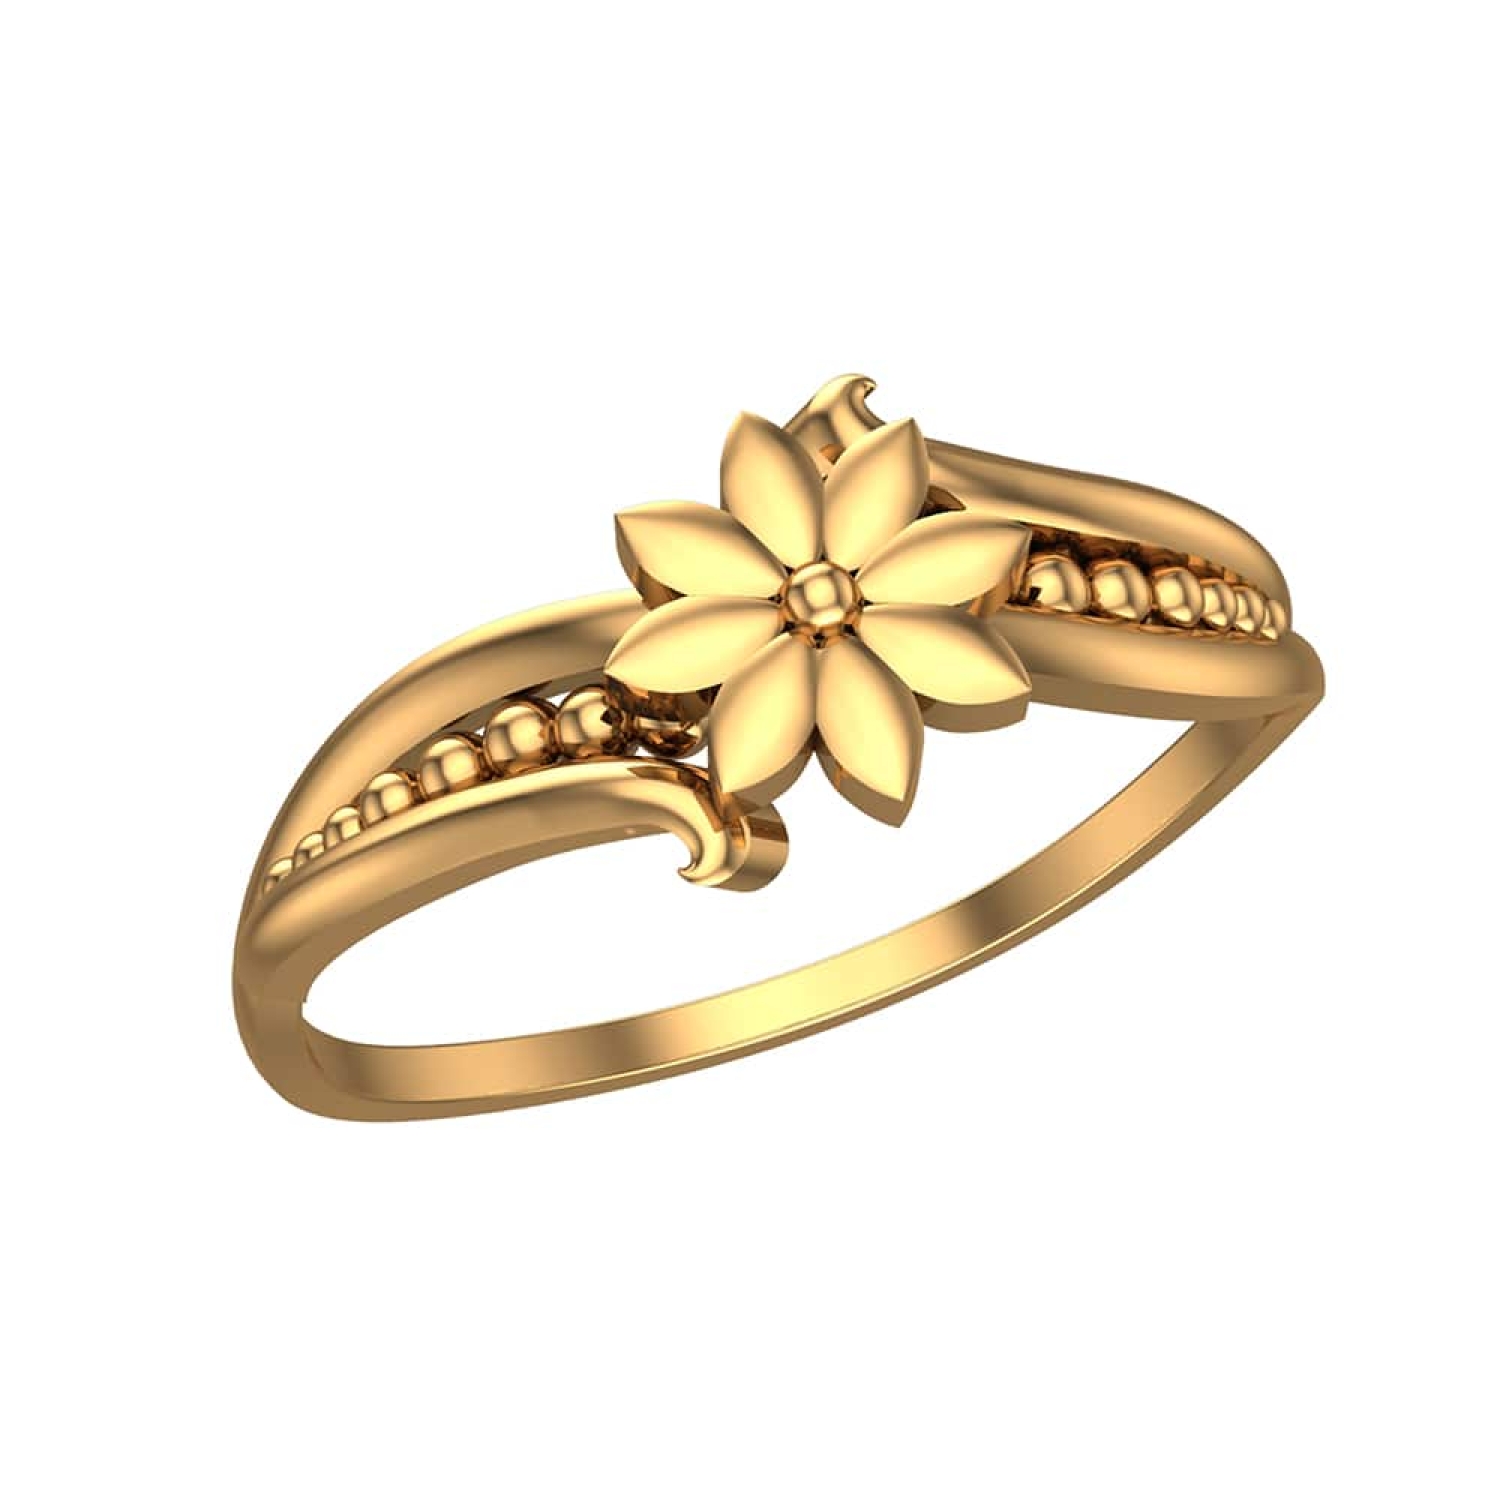 Anya Gold Rings for daily uses | Dishis Designer Jewellery